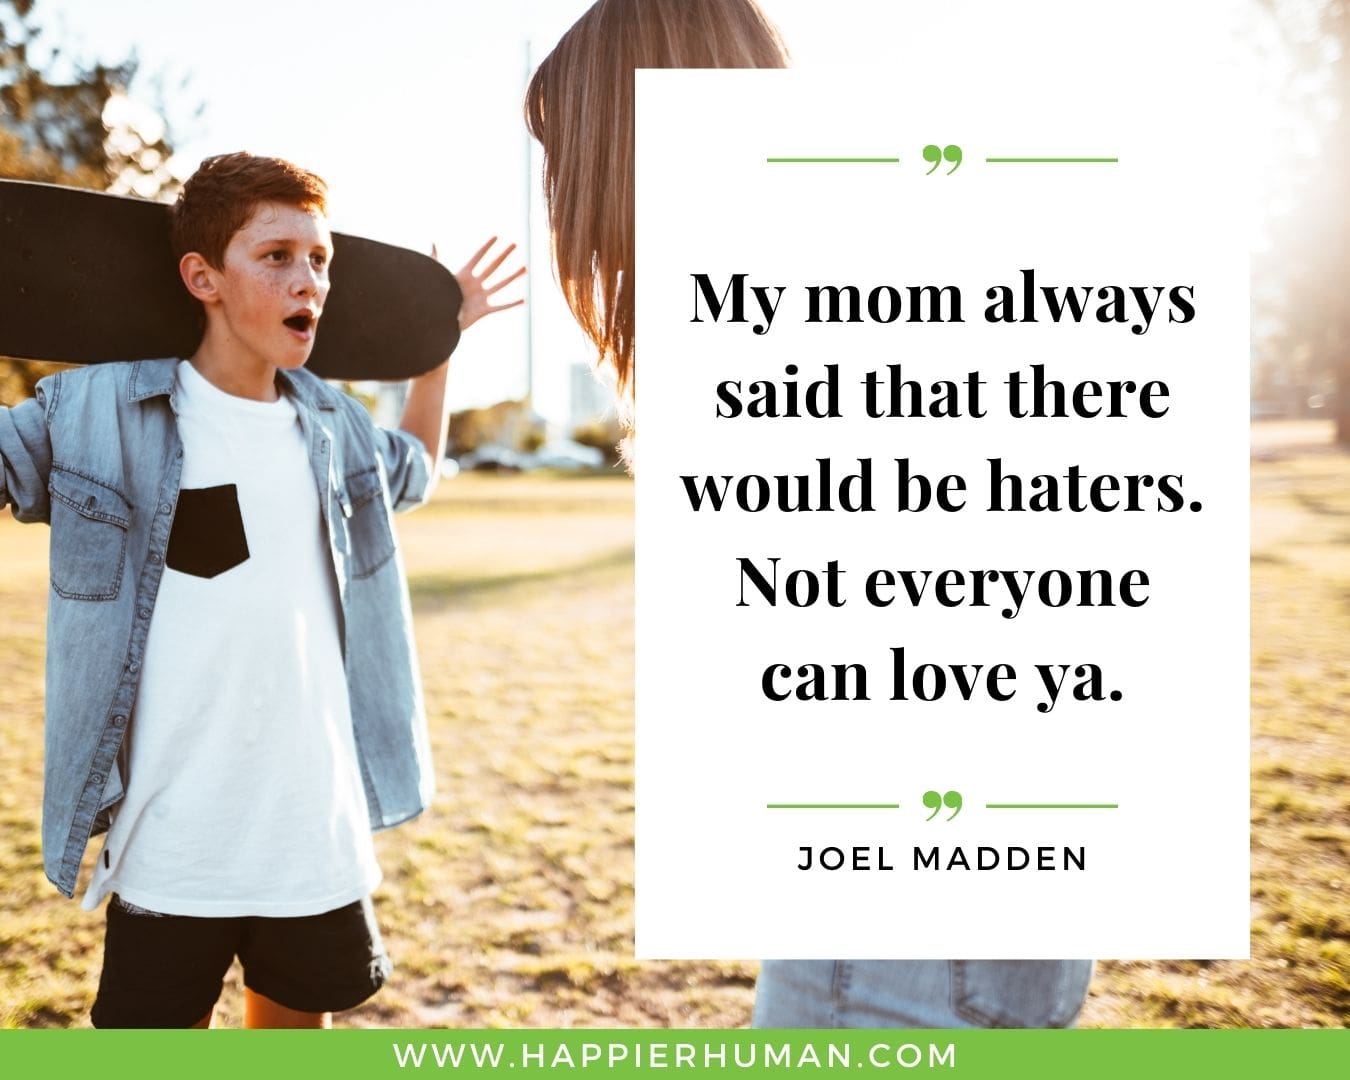 Haters Quotes - “My mom always said that there would be haters. Not everyone can love ya.” - Joel Madden